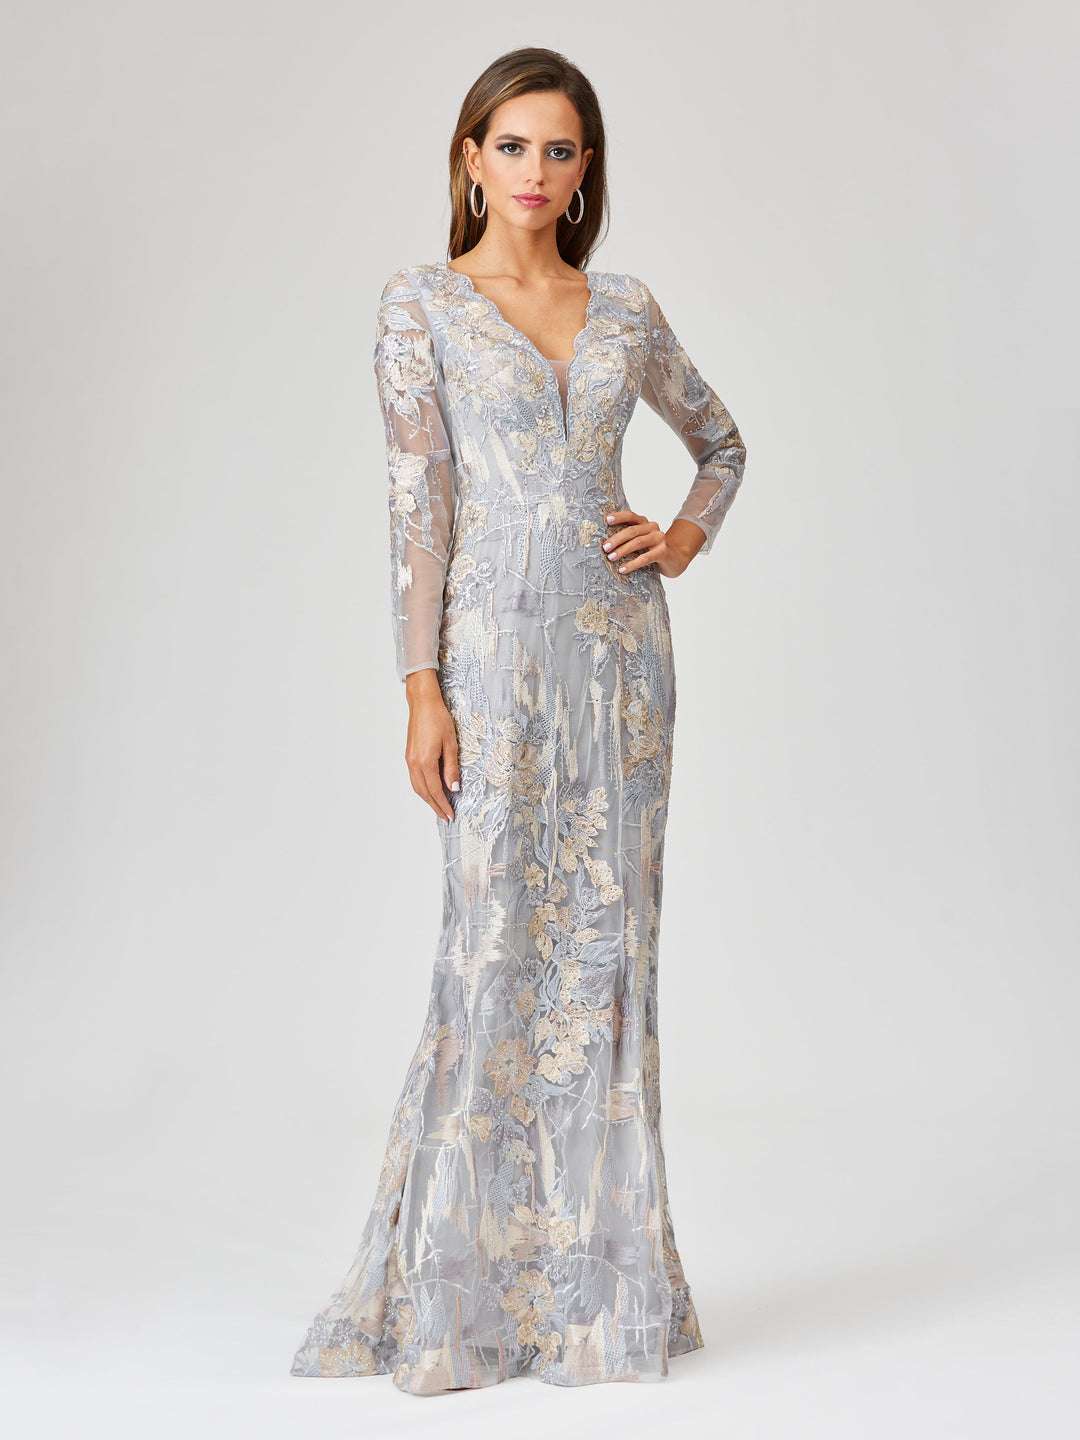 Lara 29468 - Long Sleeve Lace Gown with Removable Over Skirt - FOSTANI